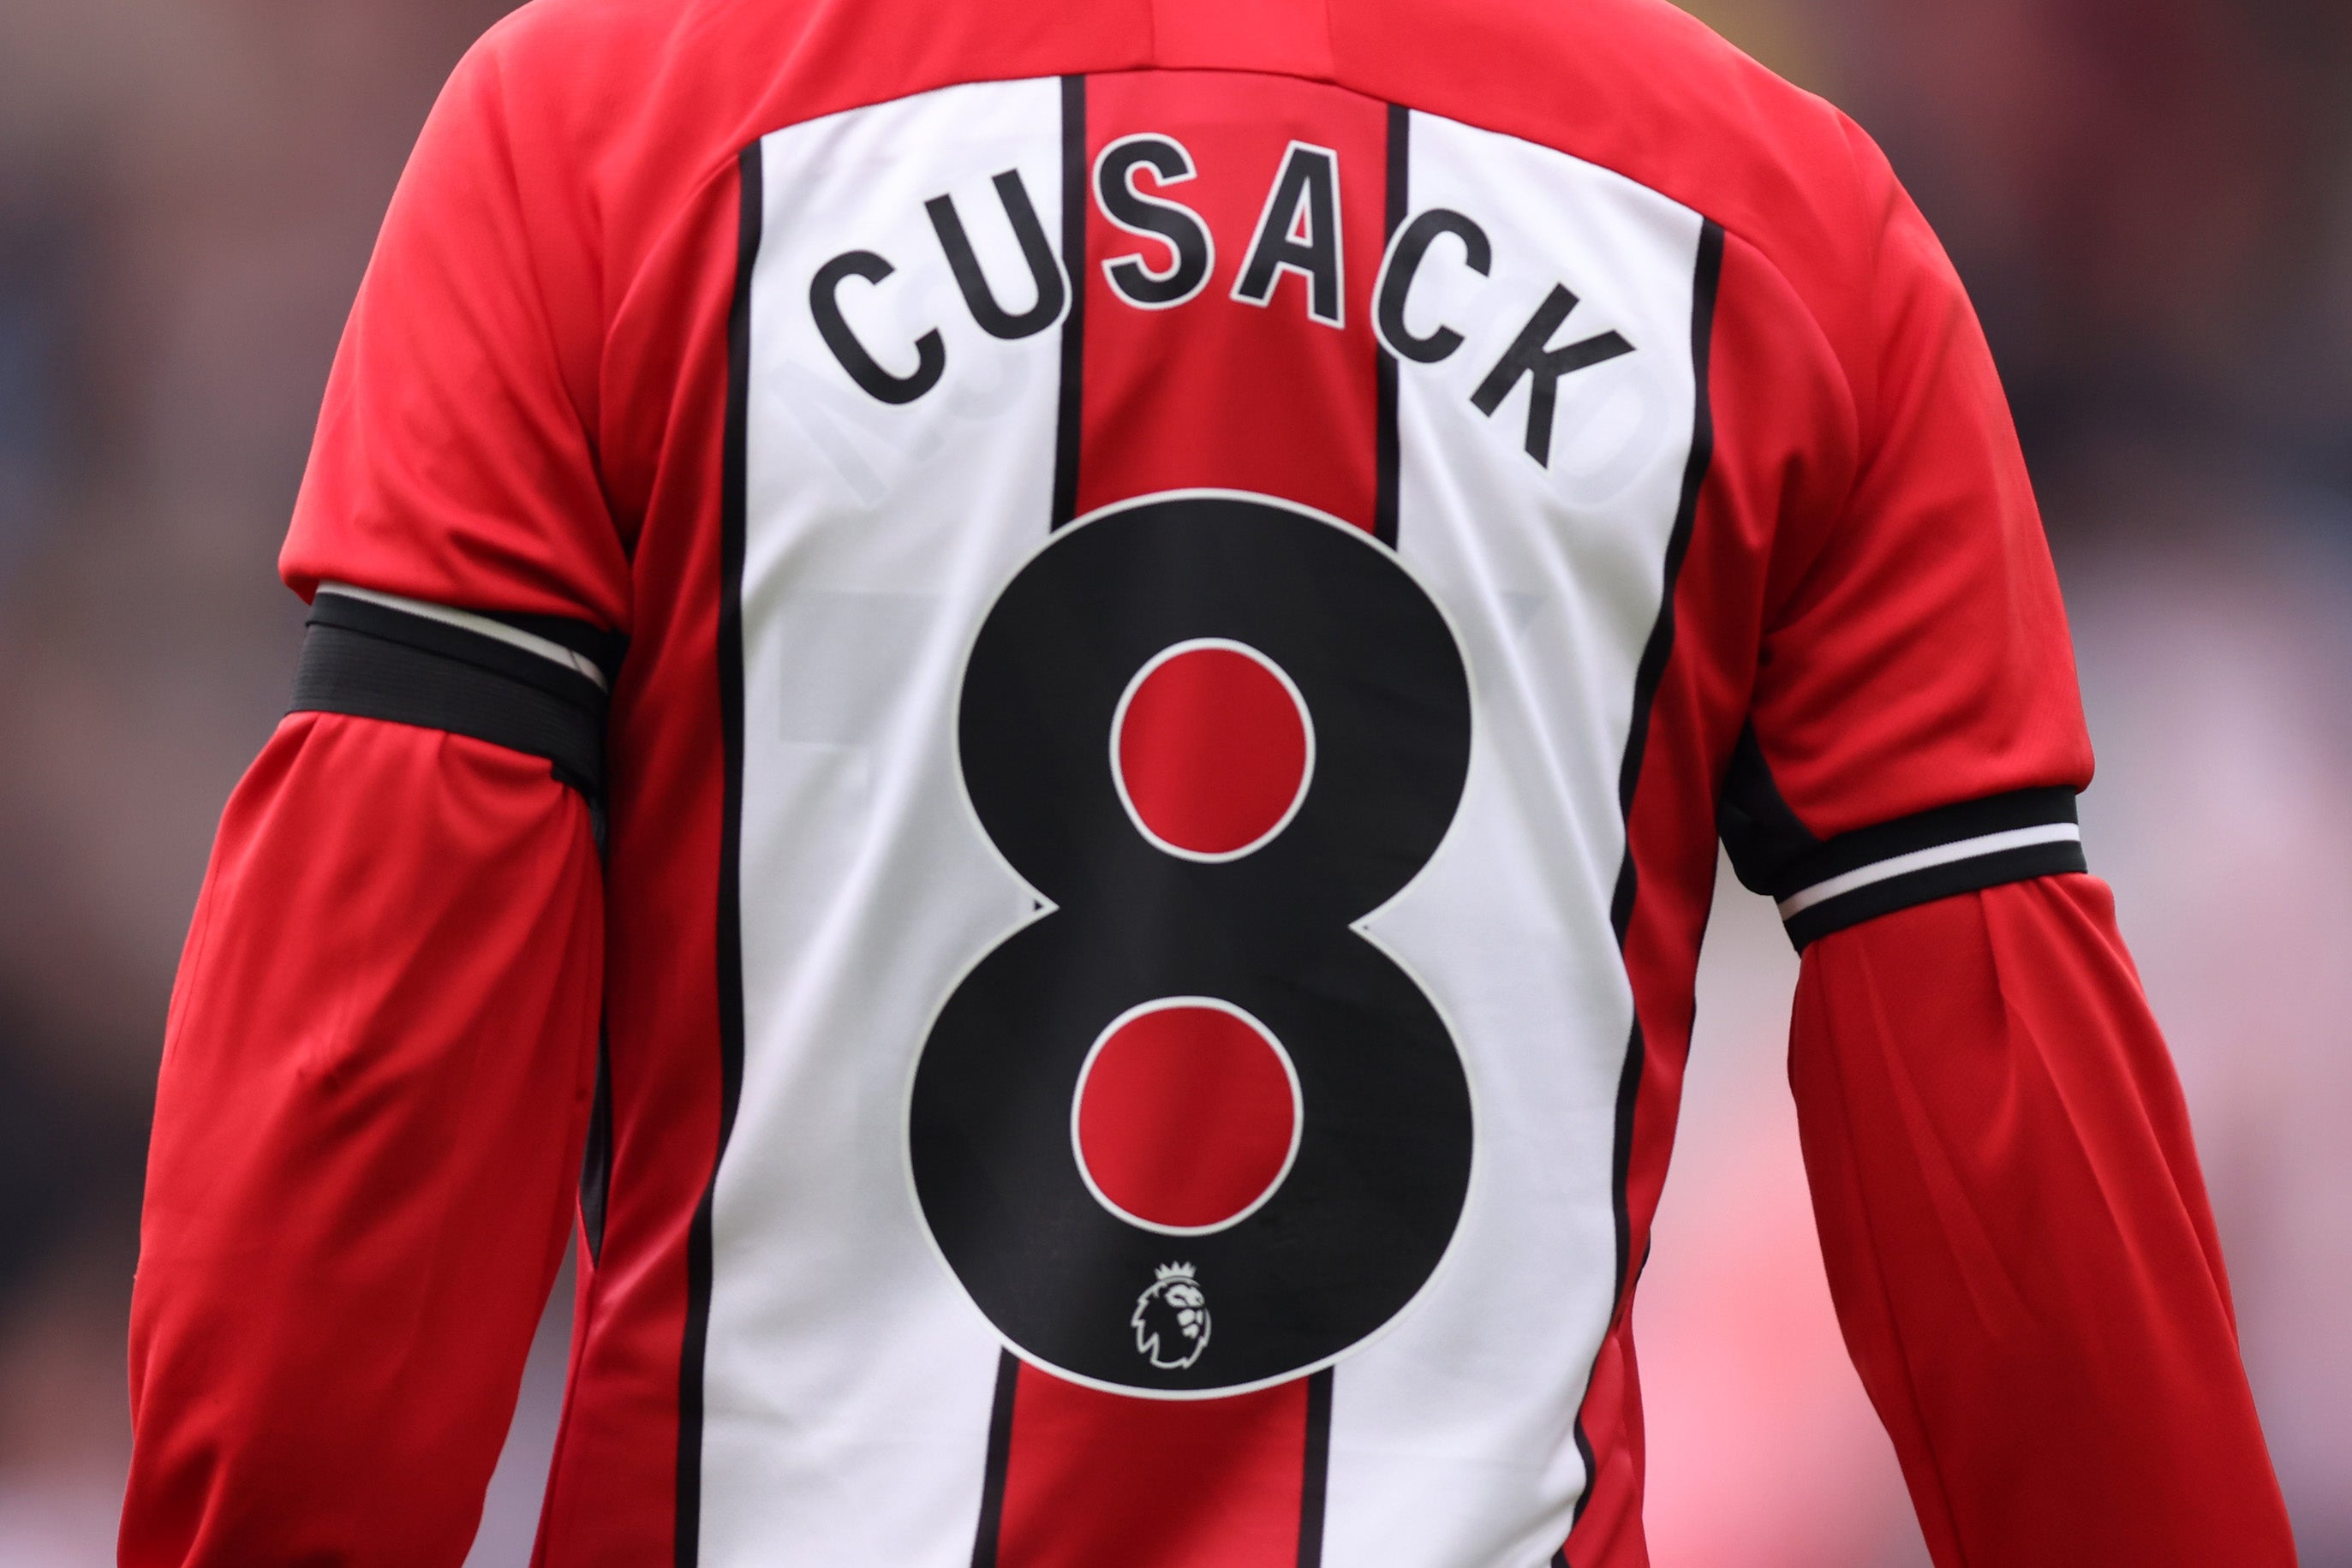 Cusack’s name and number was worn by Oliver Norwood